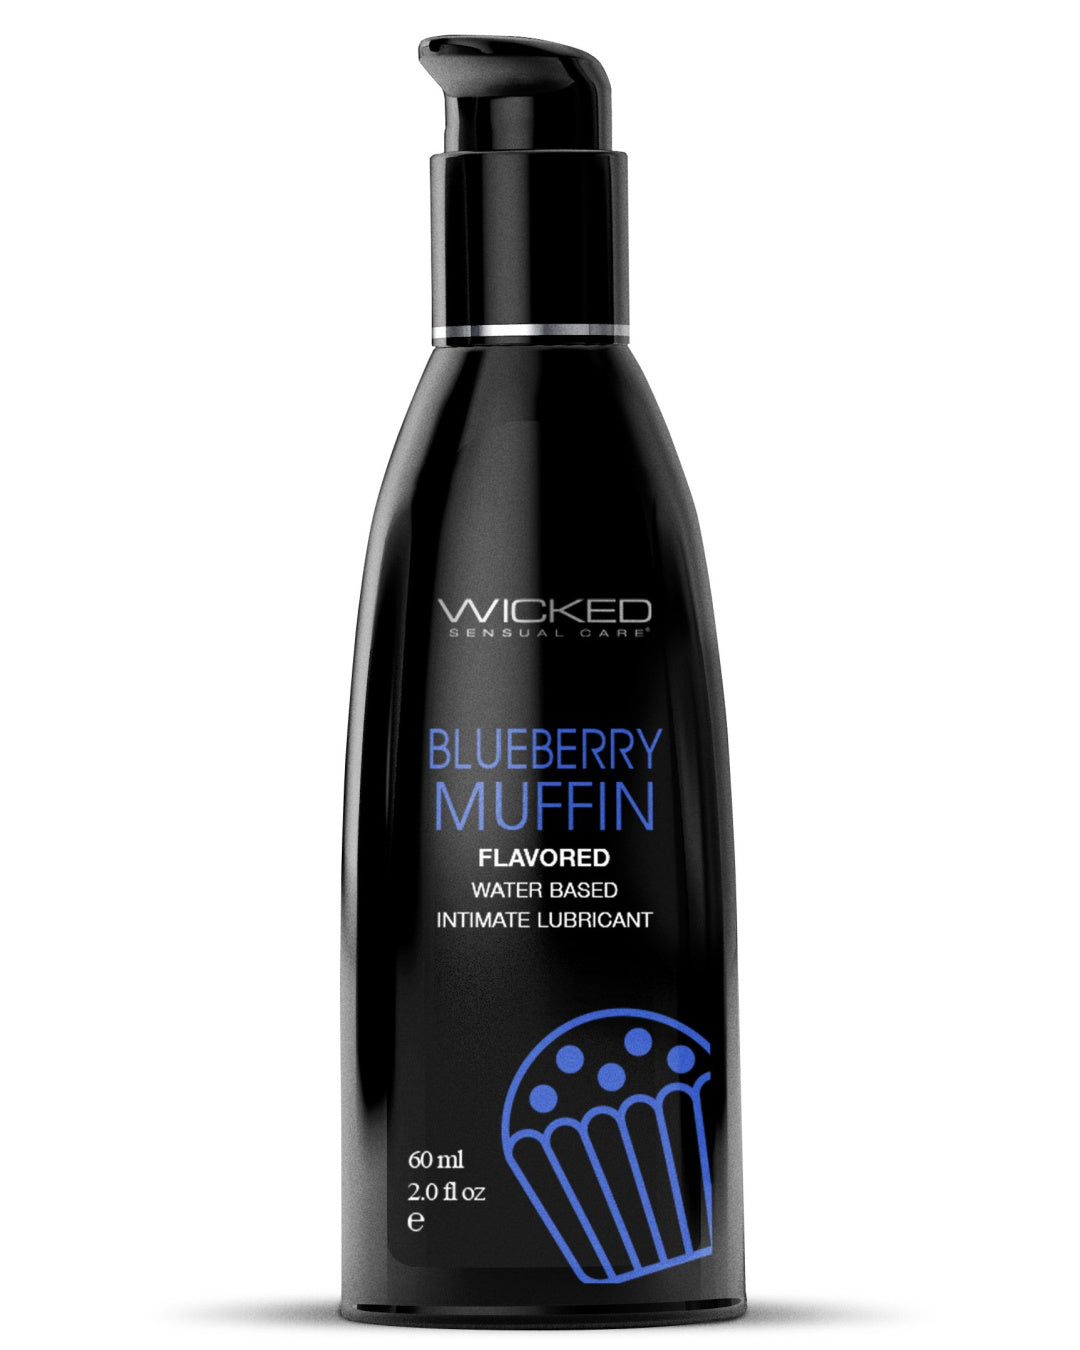 Wicked Aqua Blueberry Muffin Flavored Water Based Lubricant 2 oz black bottle blue writing 